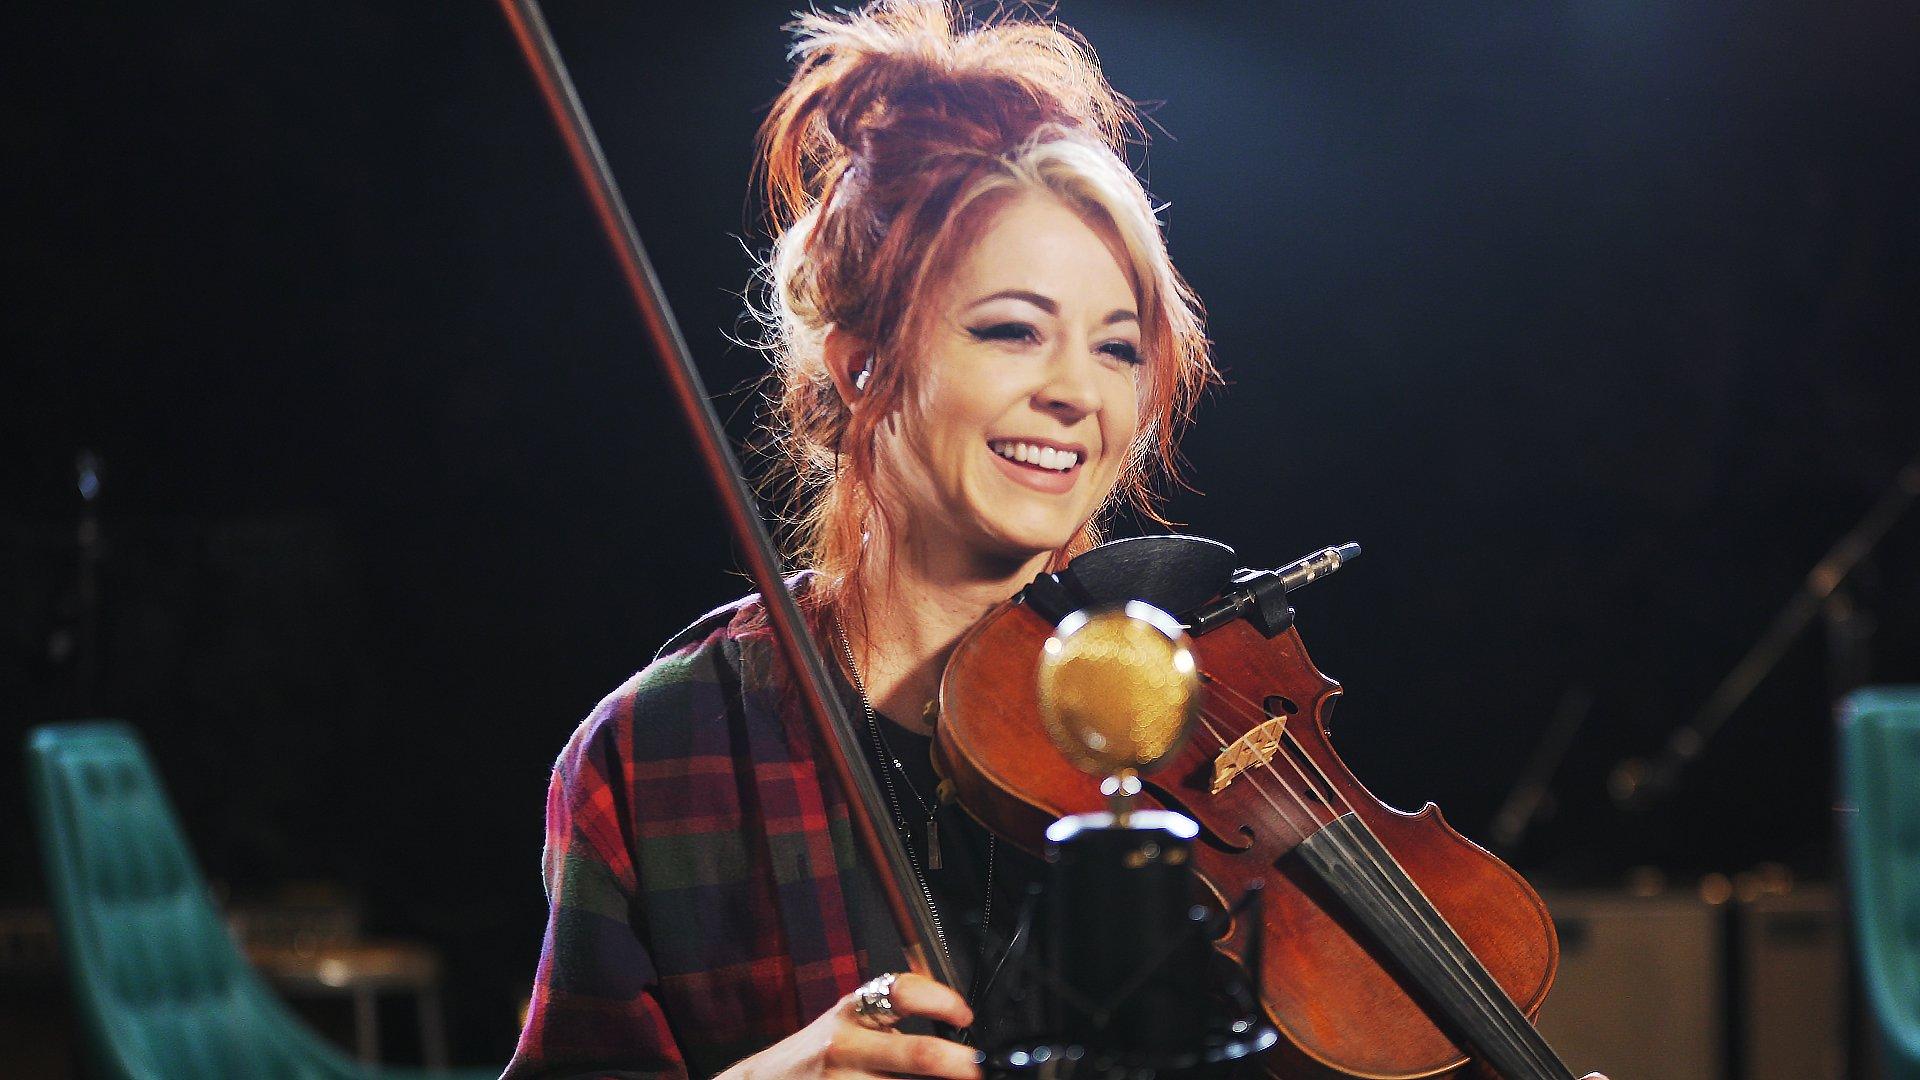 Lindsey Stirling covers Green Day's "Boulevard Of Broken Dreams"